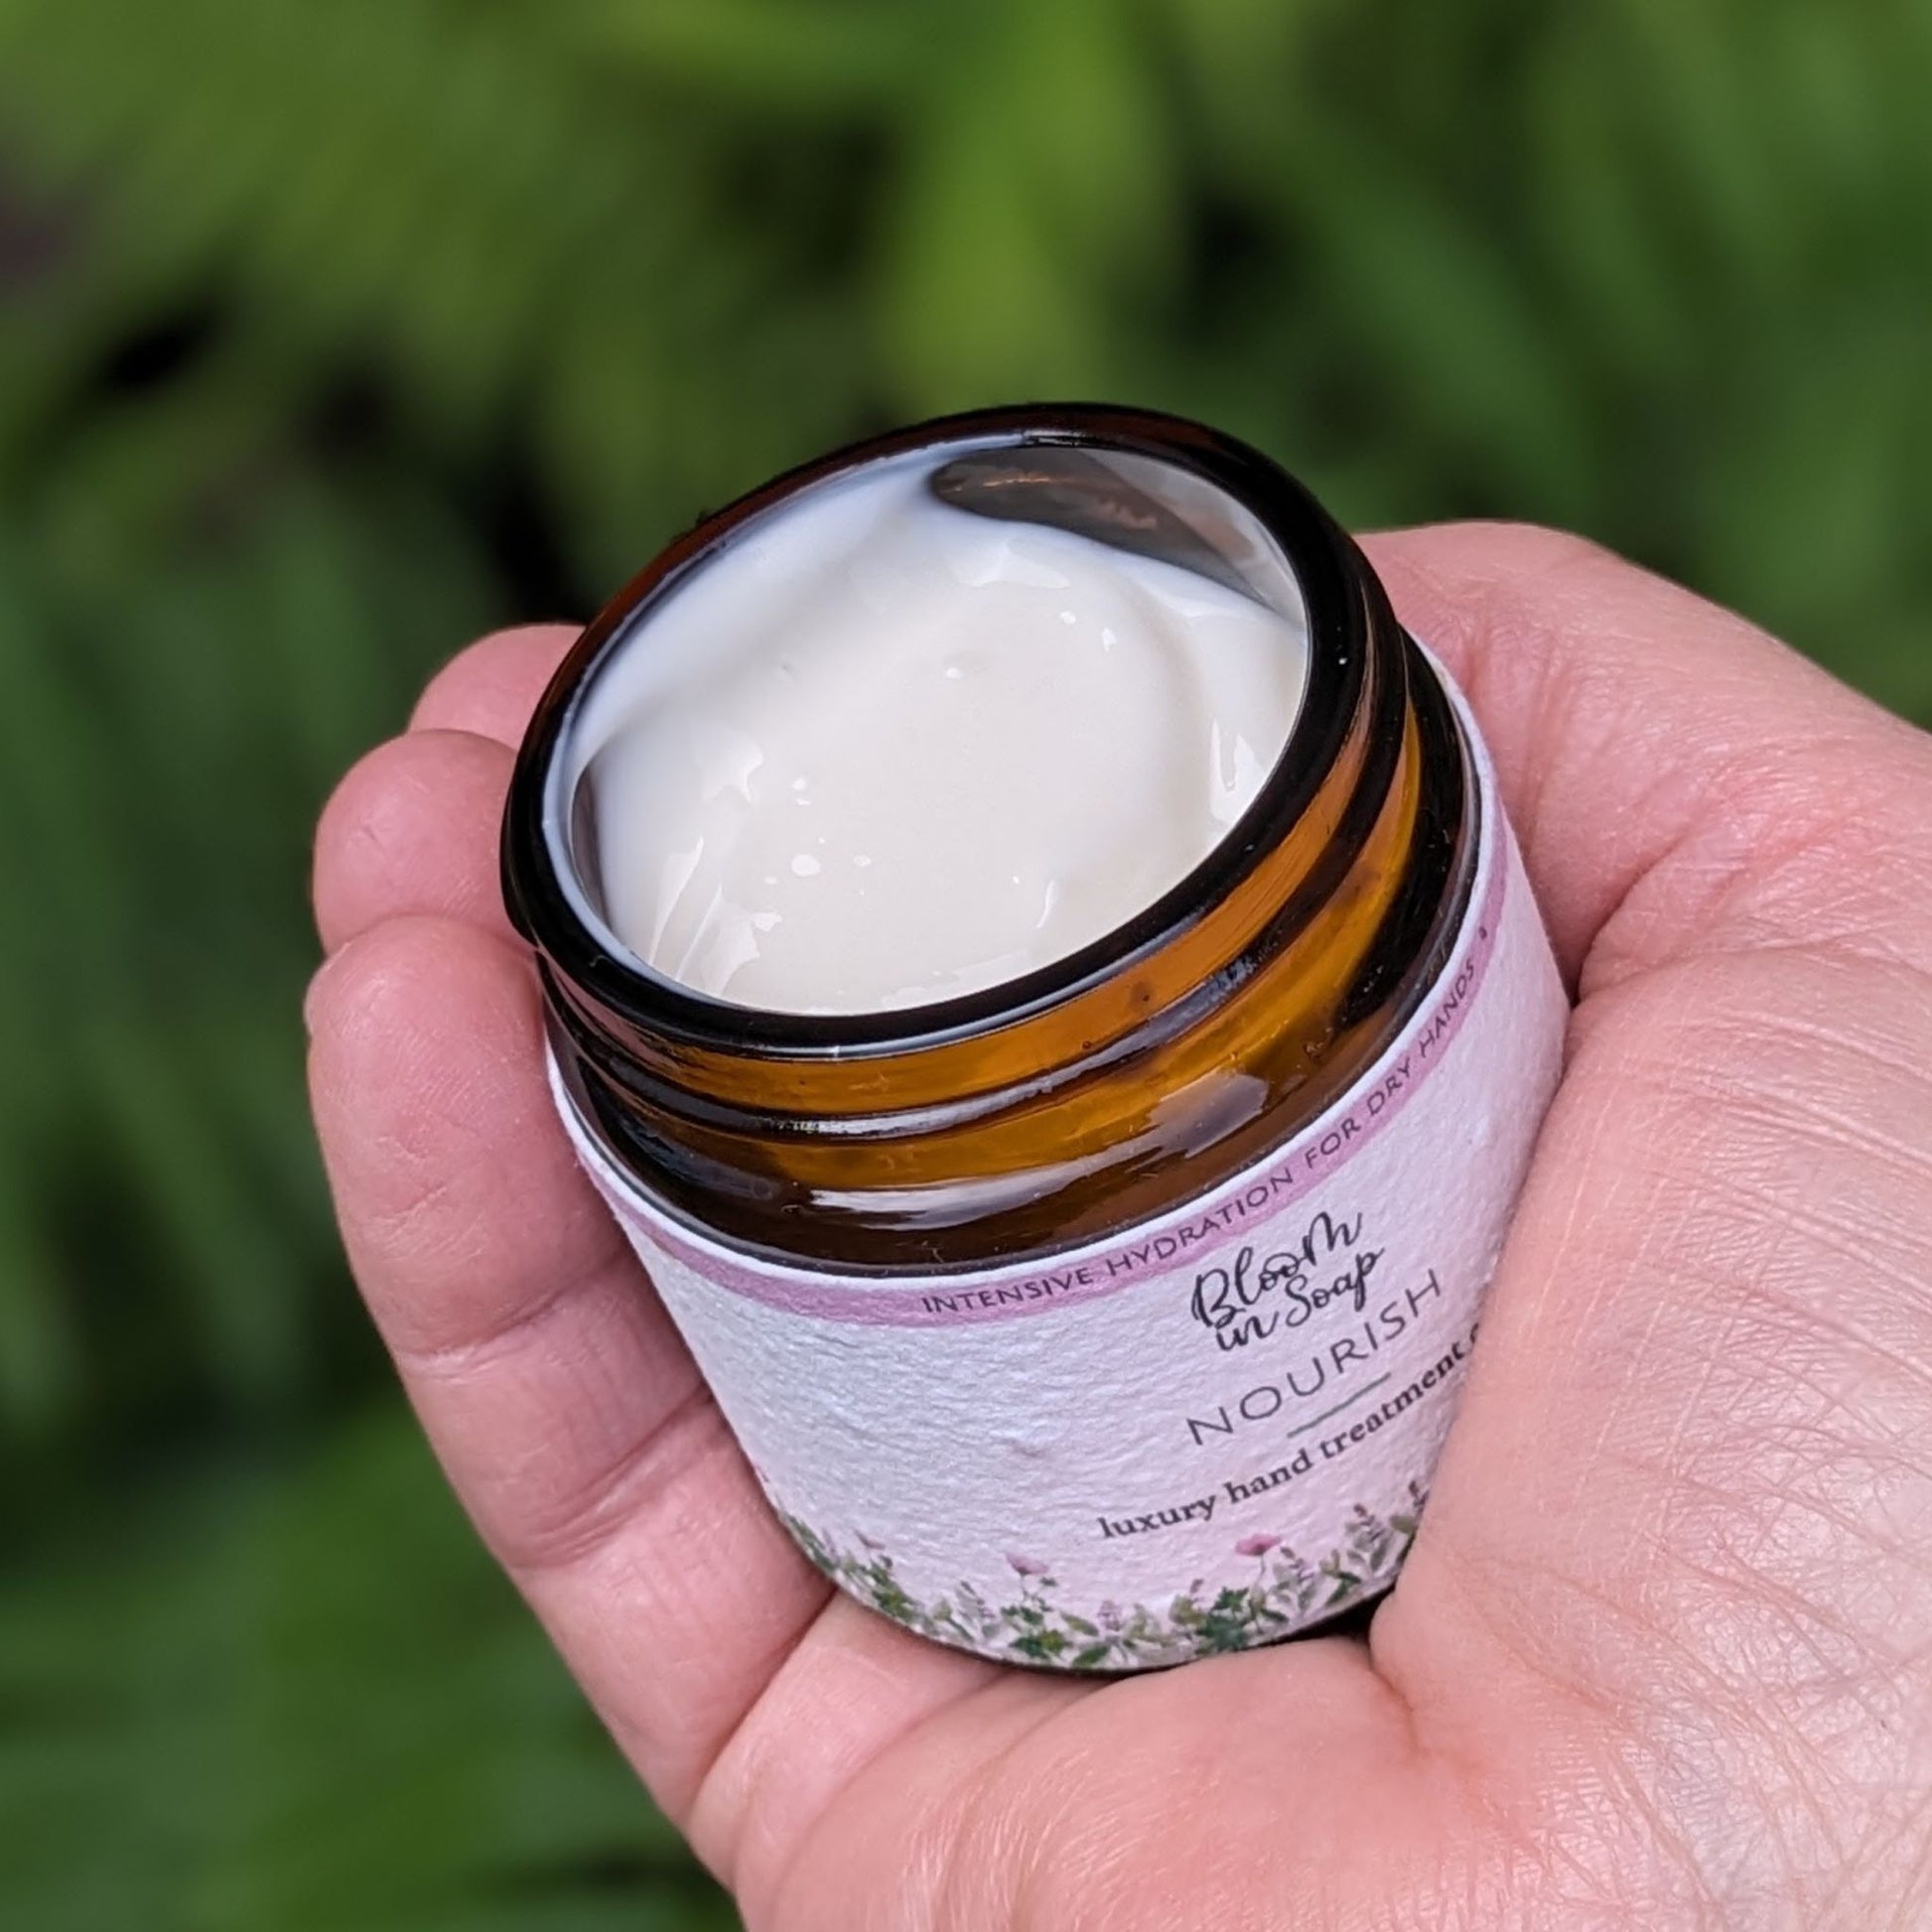 Nourish hand cream from Bloom In Soap